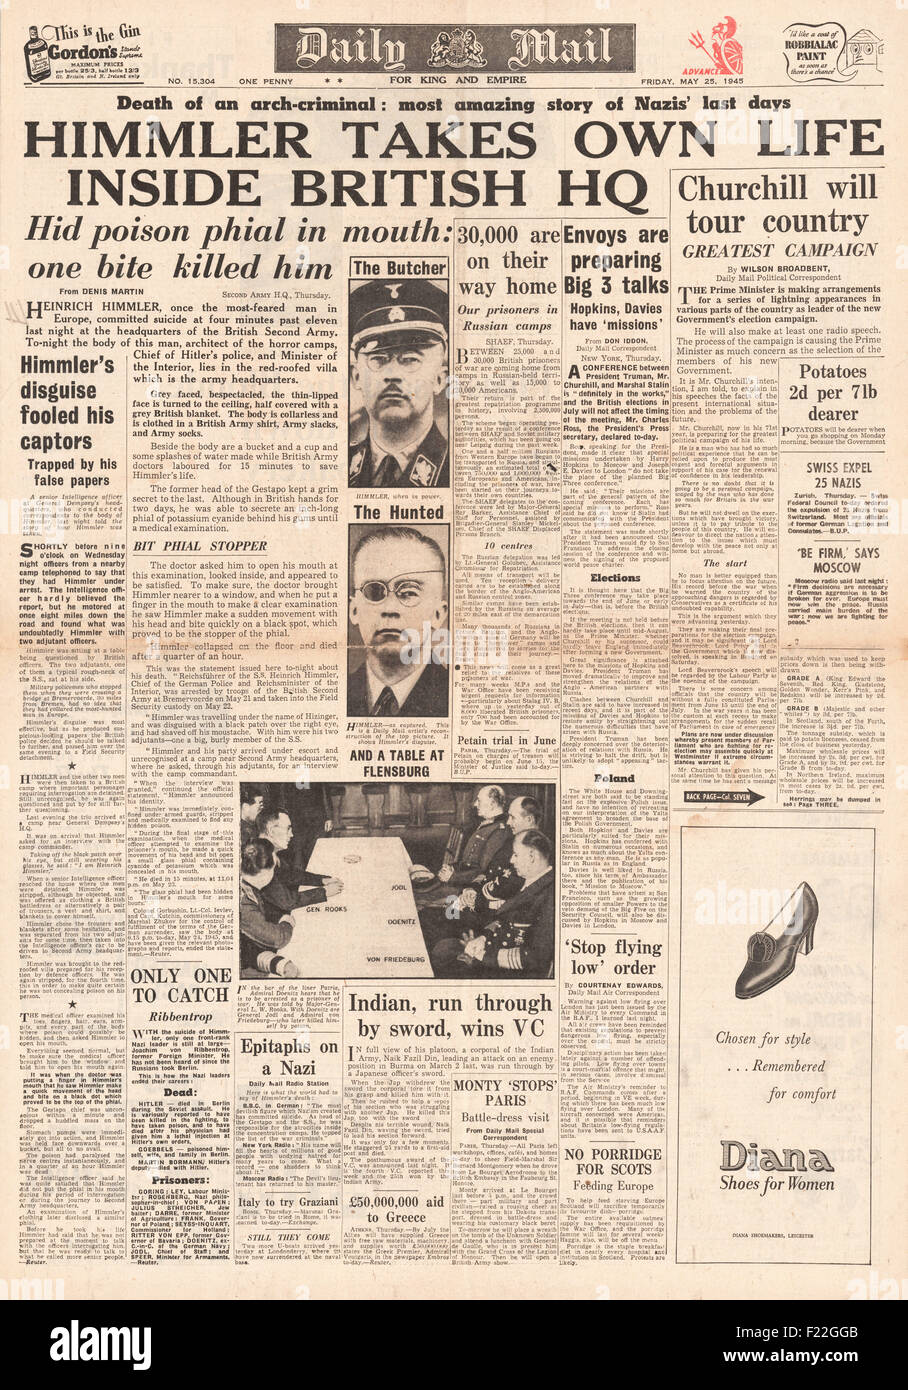 1945 Daily Mail front page reporting Heinrich Himmler suicida mentre in British custodia Foto Stock